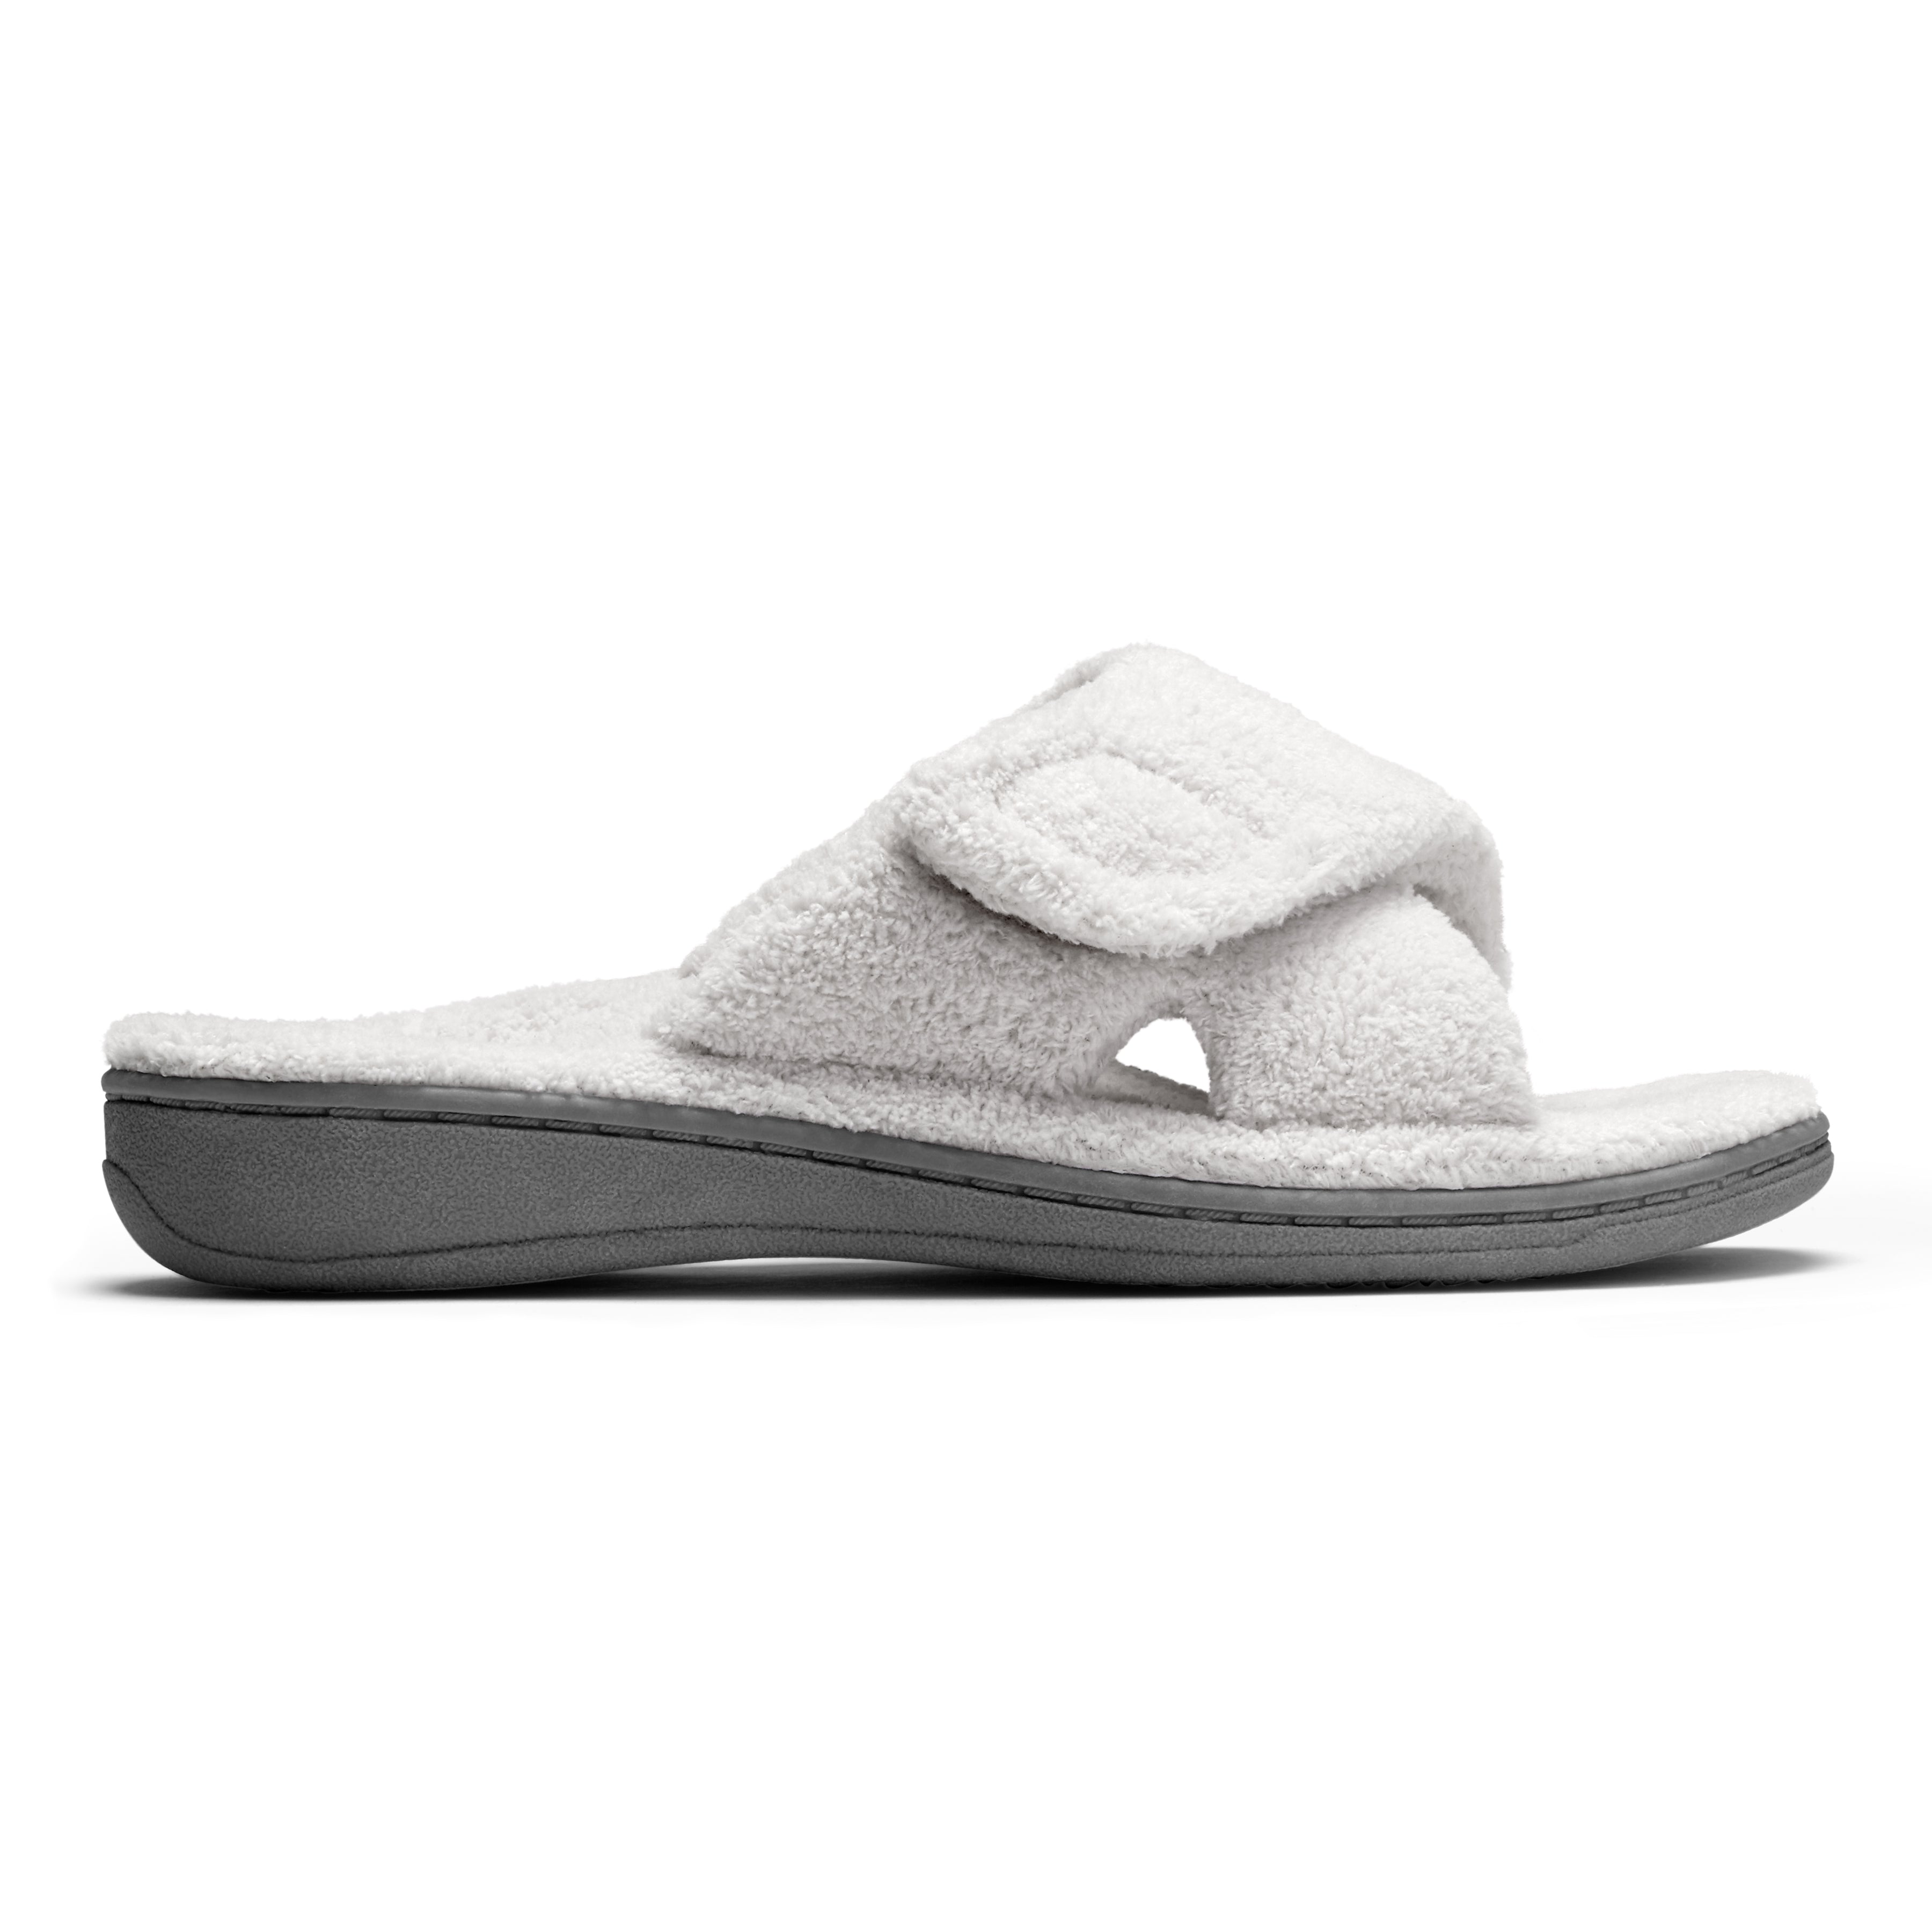 vionic slippers on sale